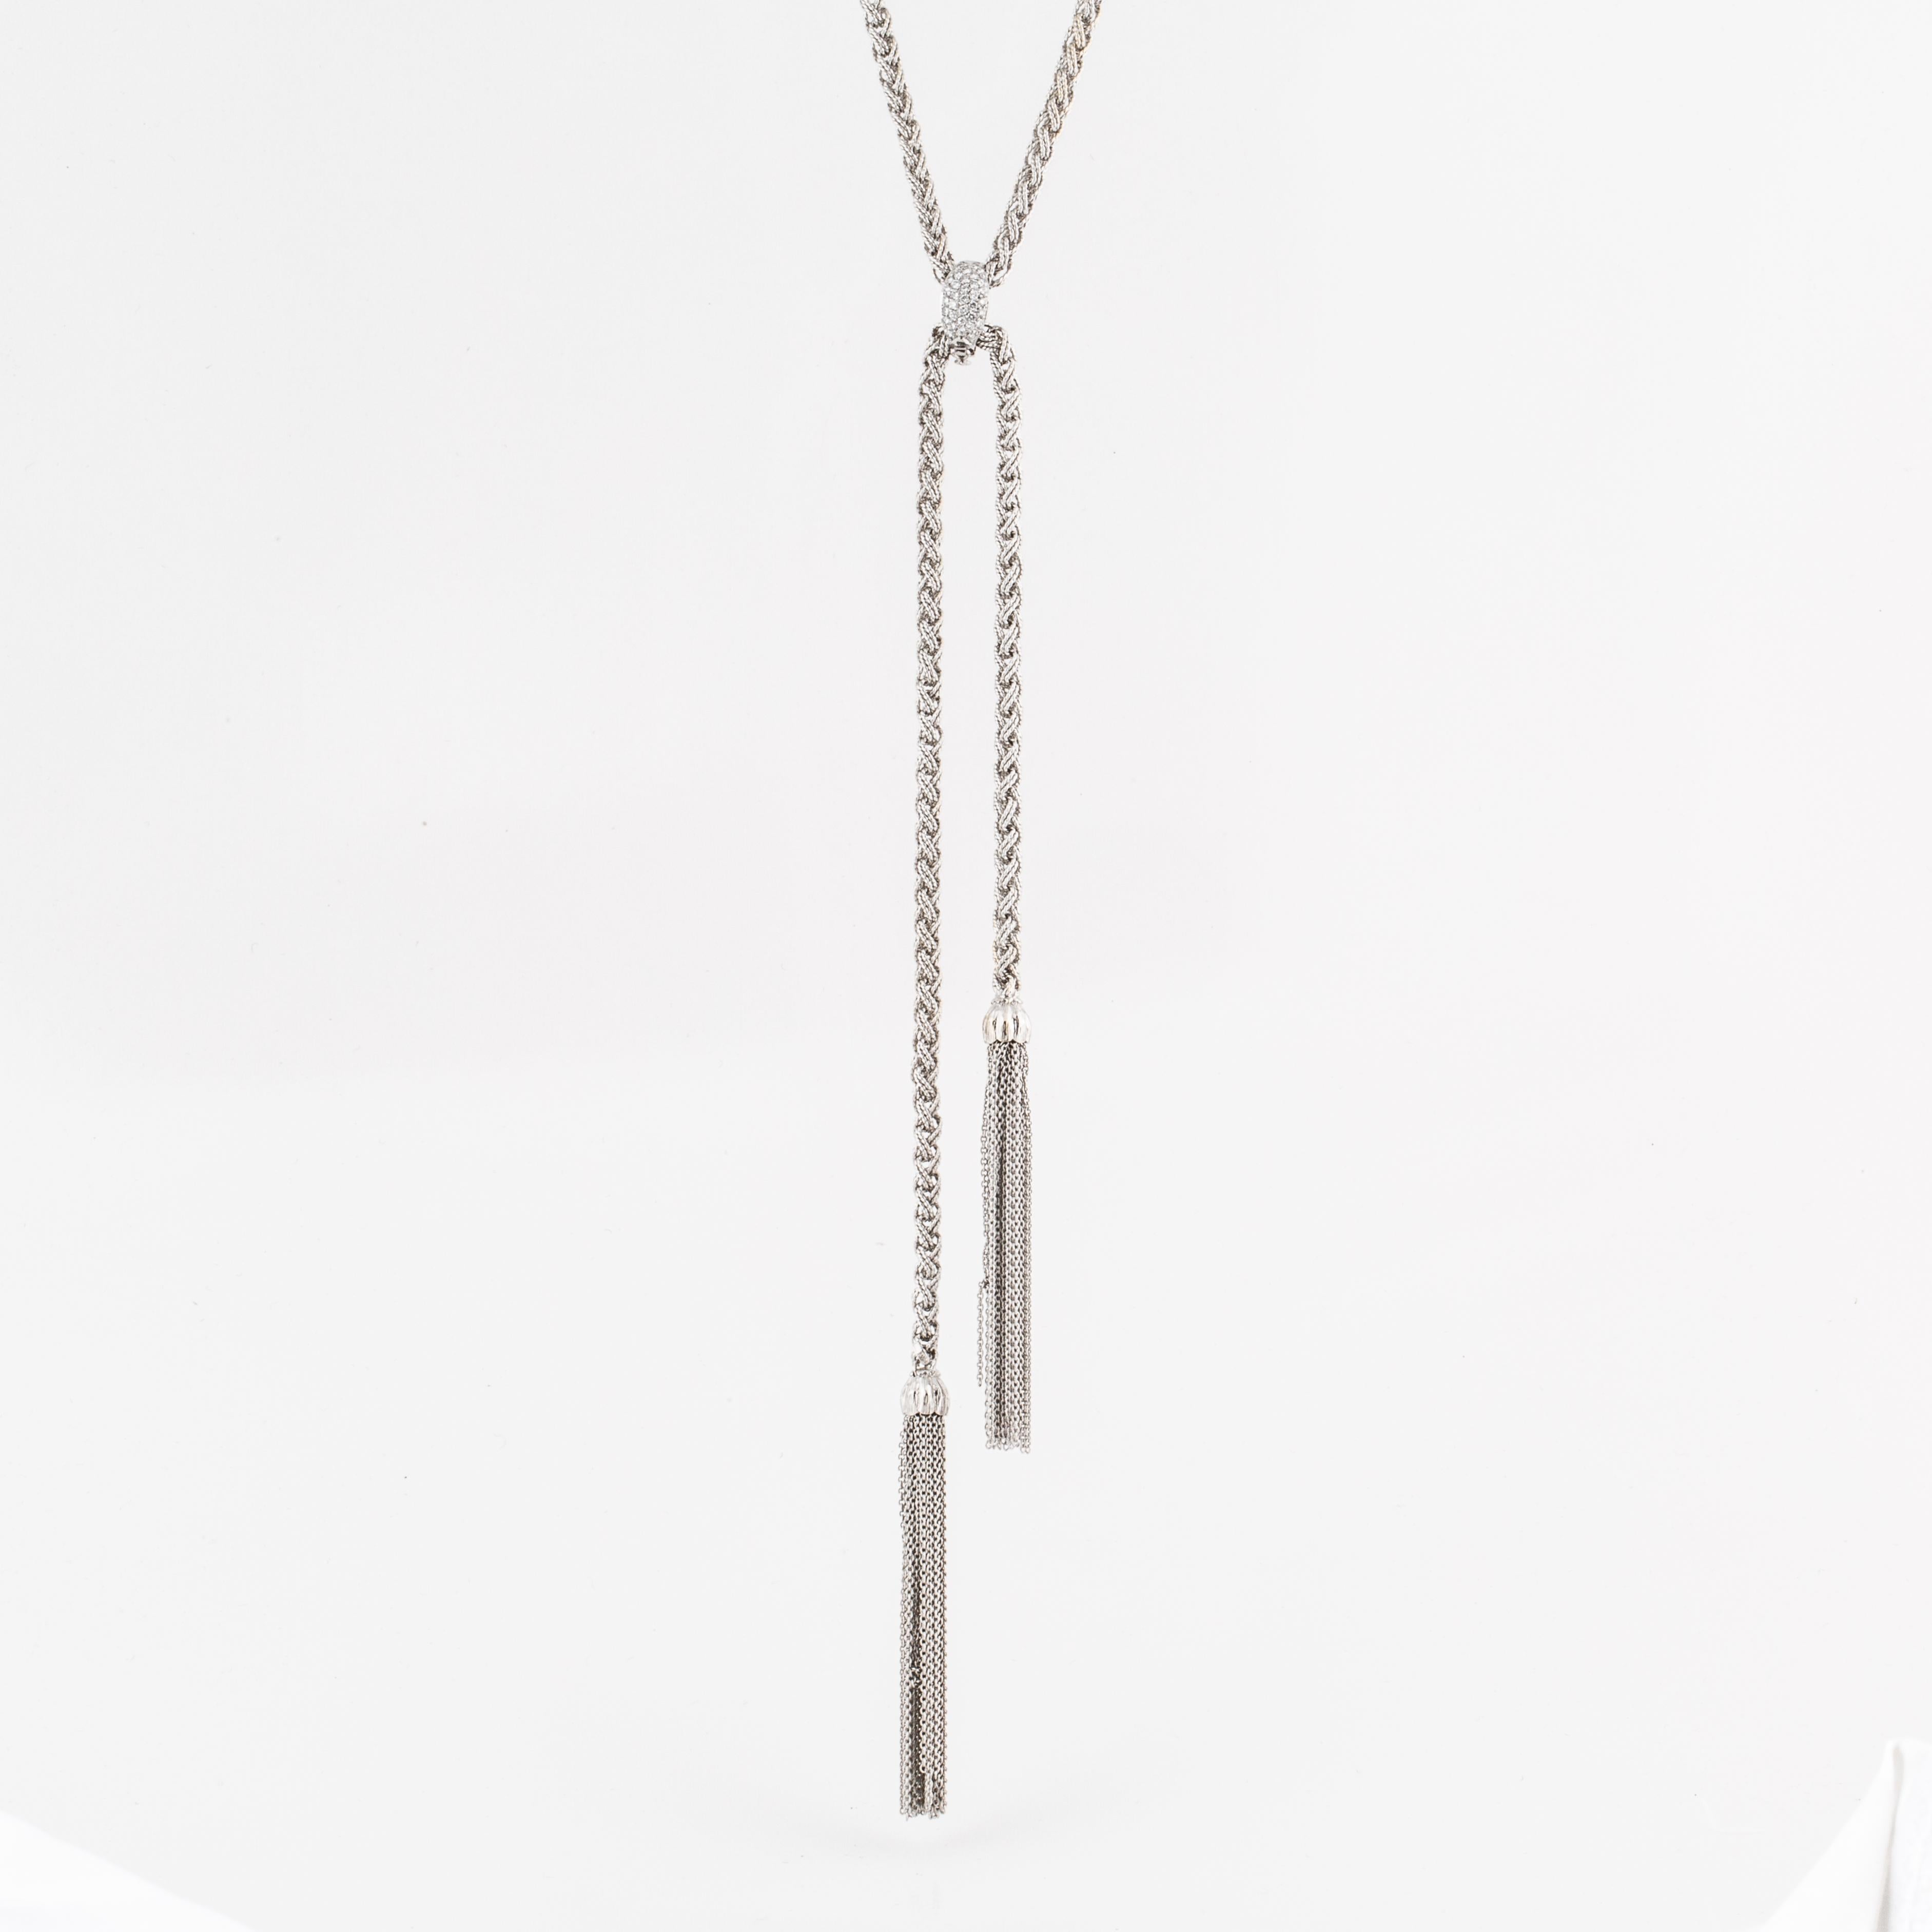 Necklace composed of 18K white gold.  There are removable tassels as well as two clasps; one accented by round diamonds and the other with a satin finish.  The diamond clasp contains 33 round diamonds with a total carat weight of 0.65.  The necklace